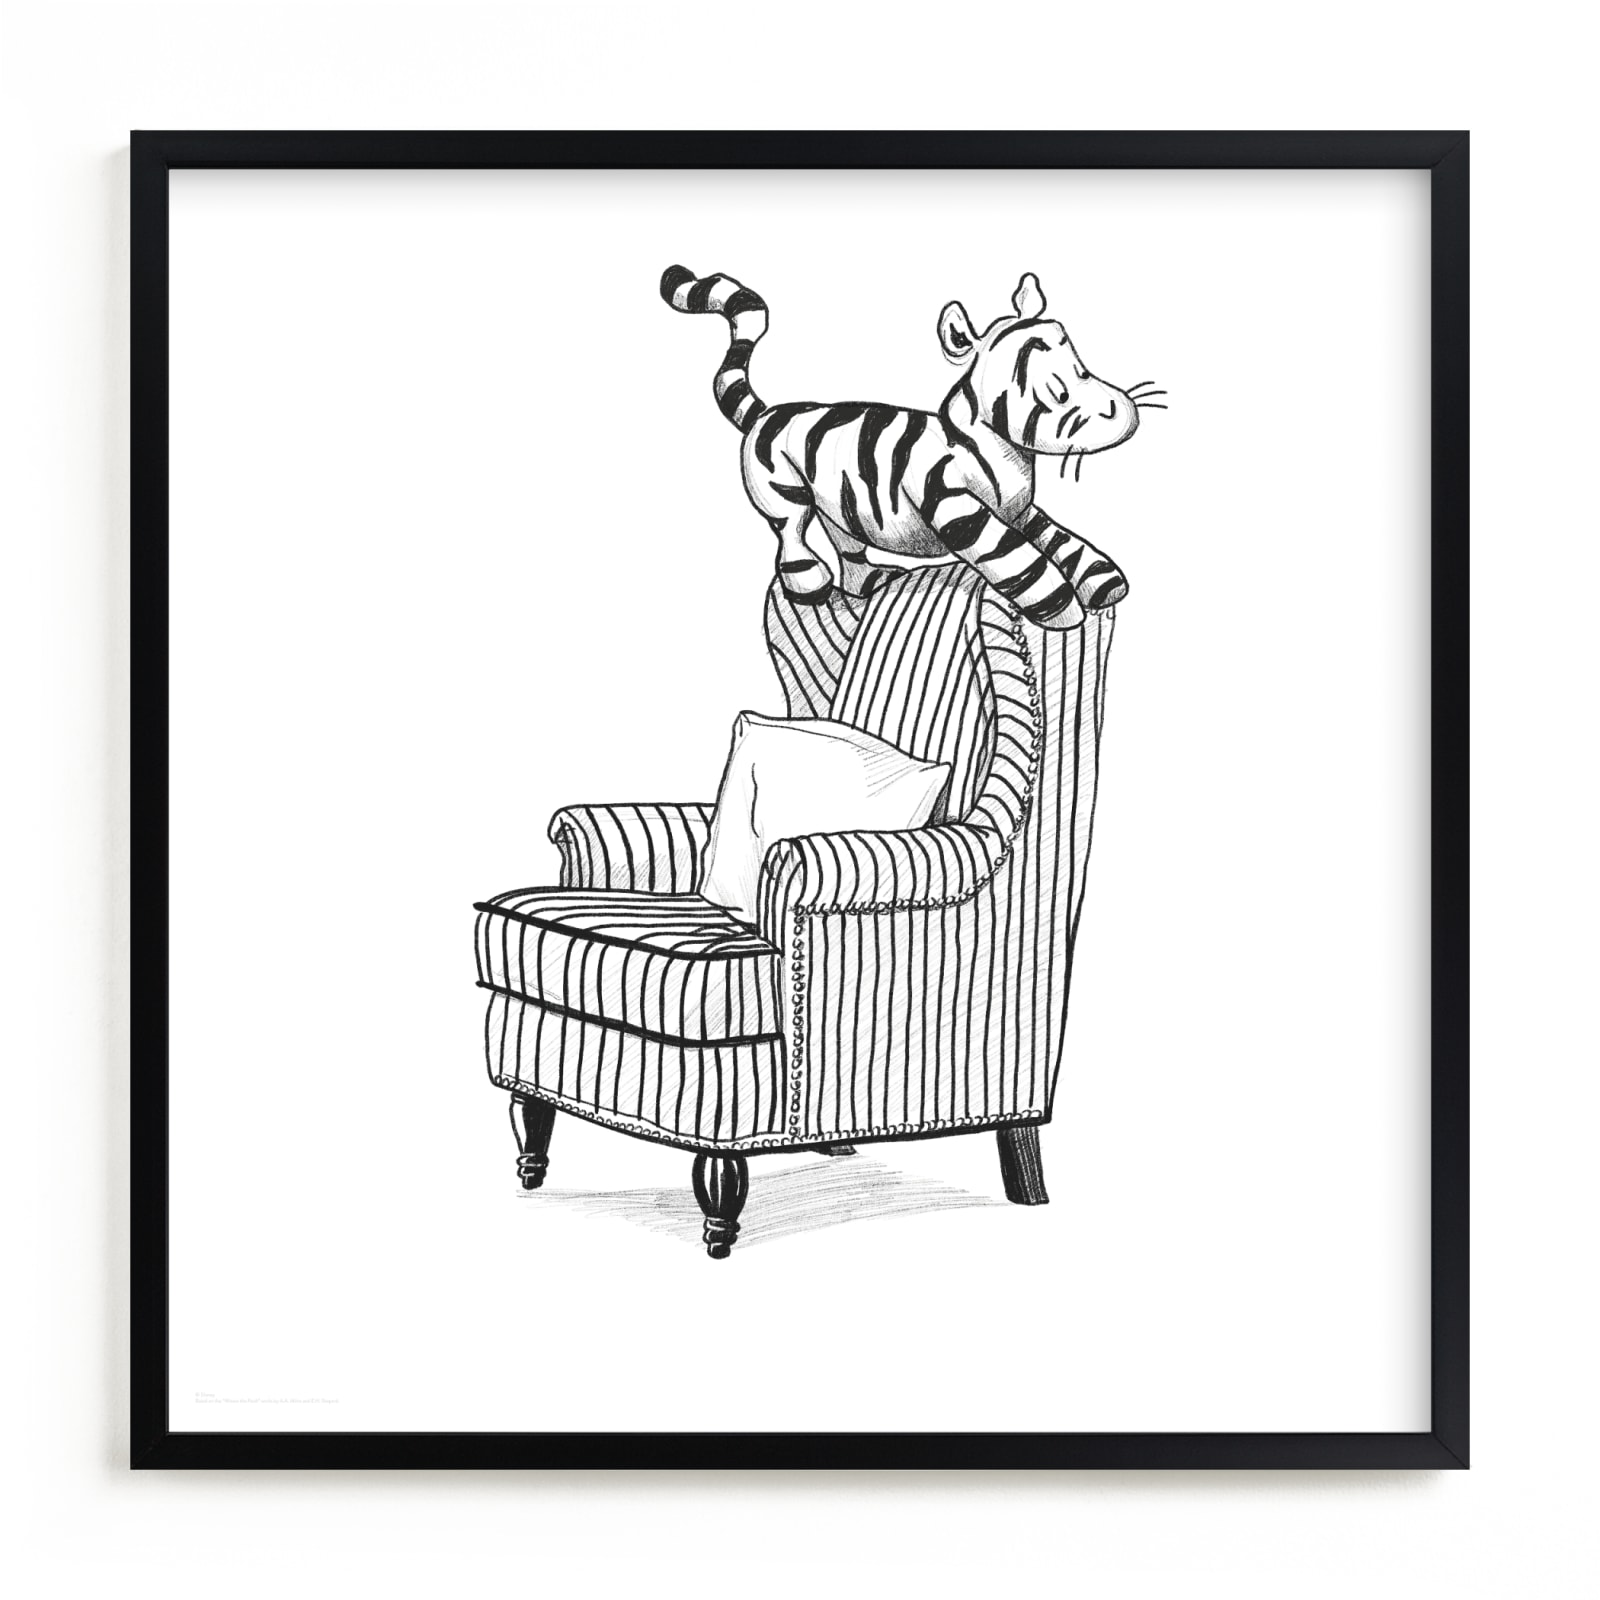 This is a black and white disney art by Stefanie Lane called Tigger Lounging | Winnie The Pooh.